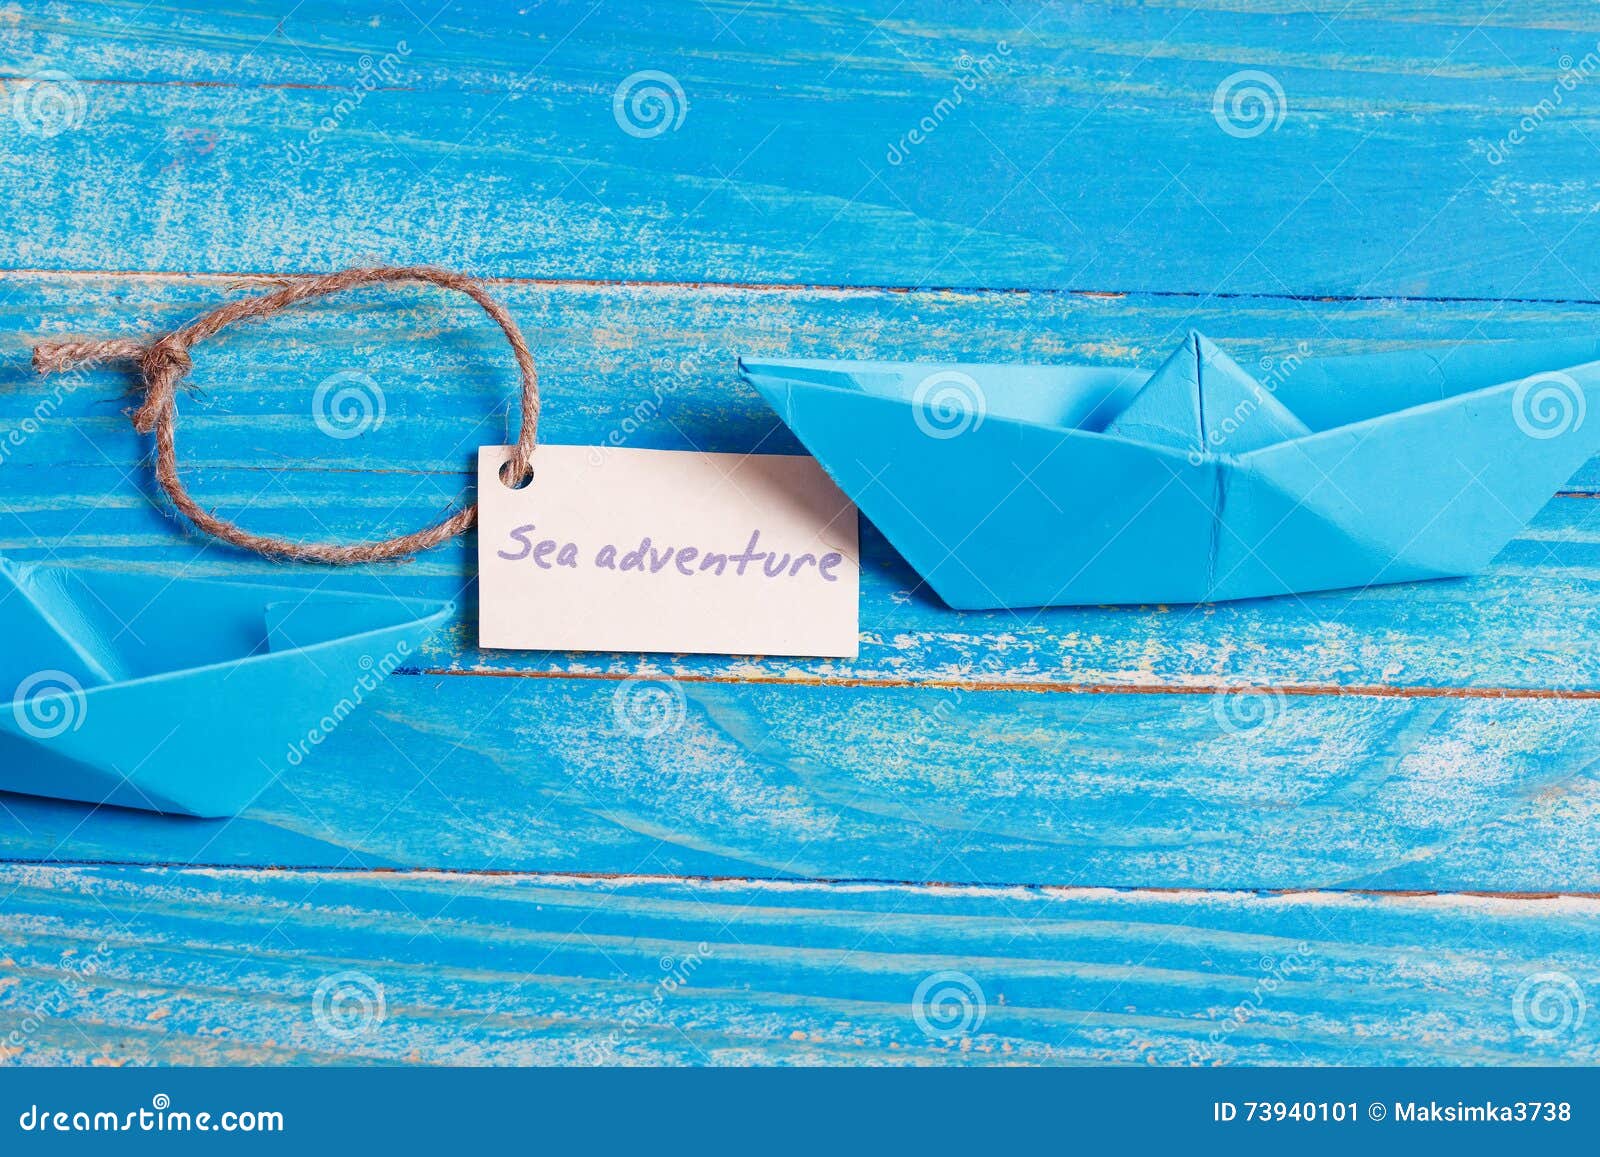 label with the words sea aventure which means go to trip on the yacht